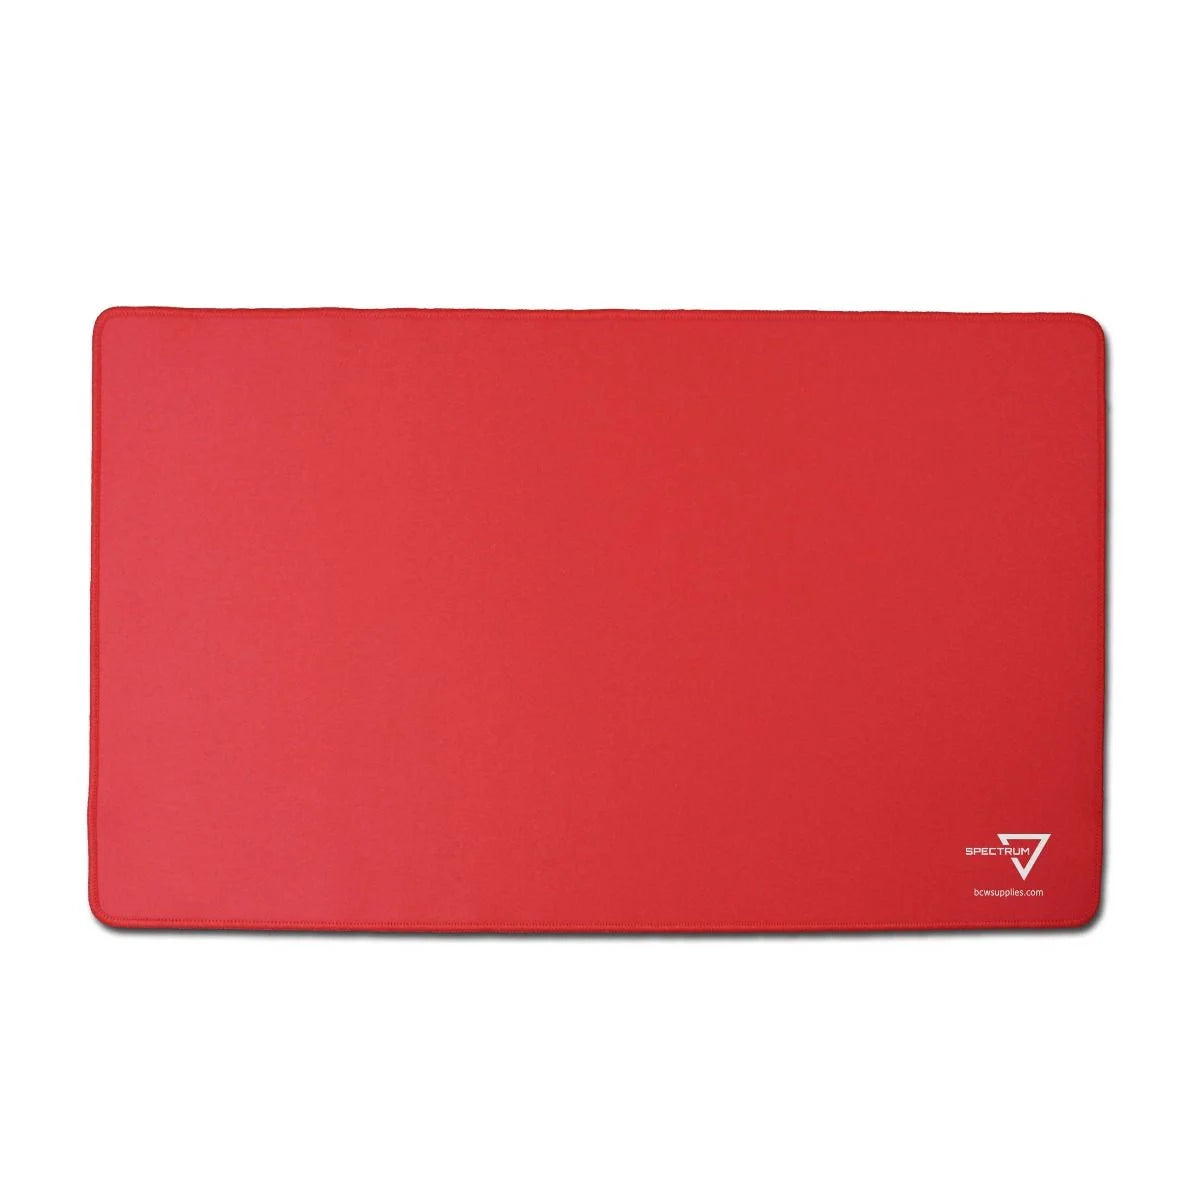 Playmat with Stitched Edging - Red